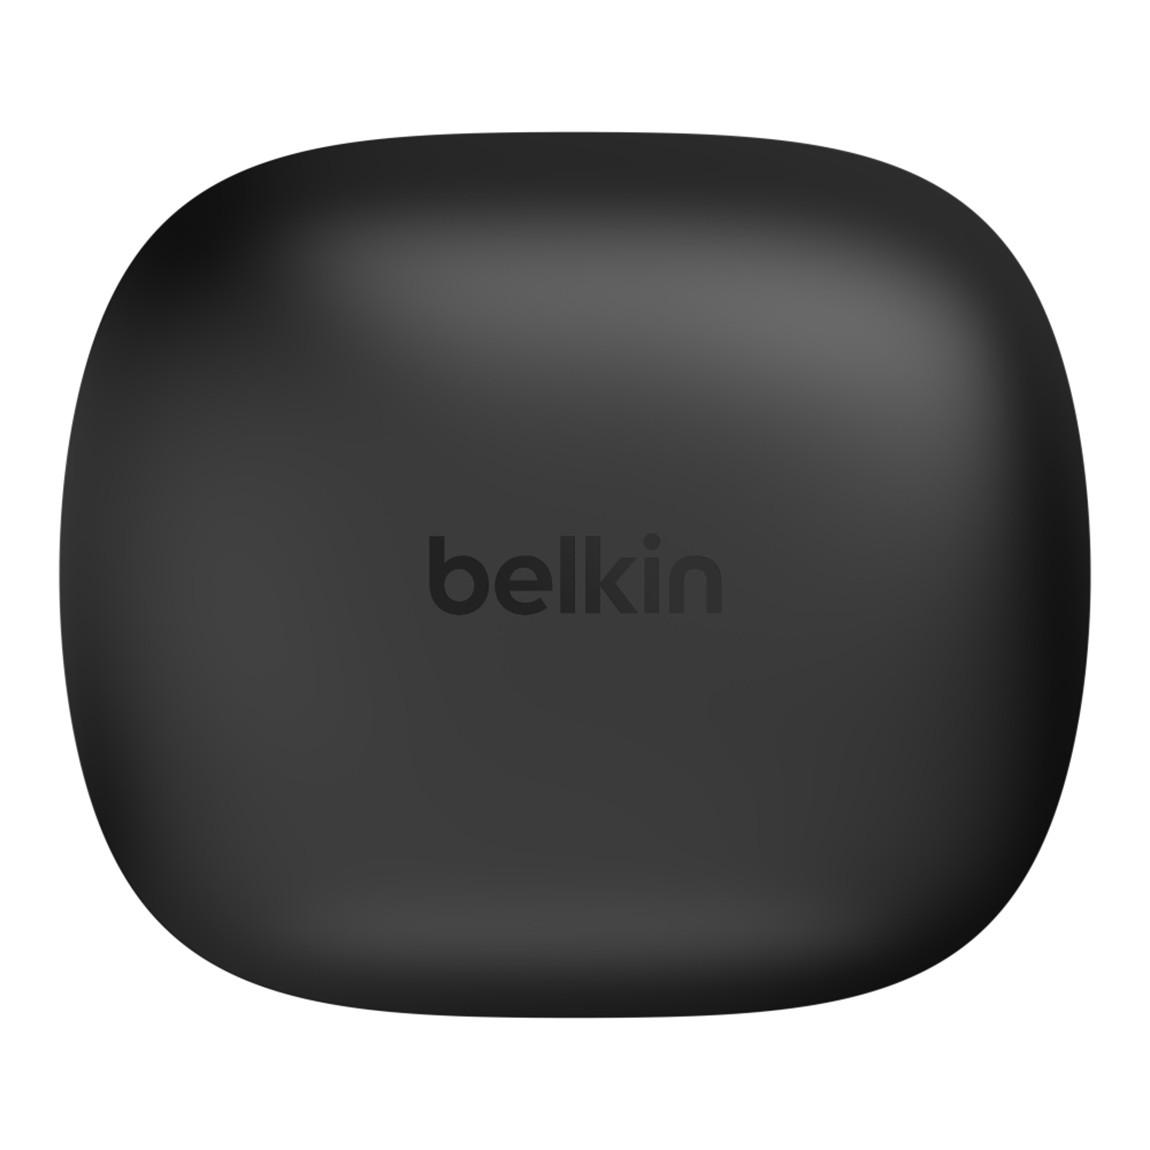 Withings Scanwatch 2 + Belkin Soundform Rise